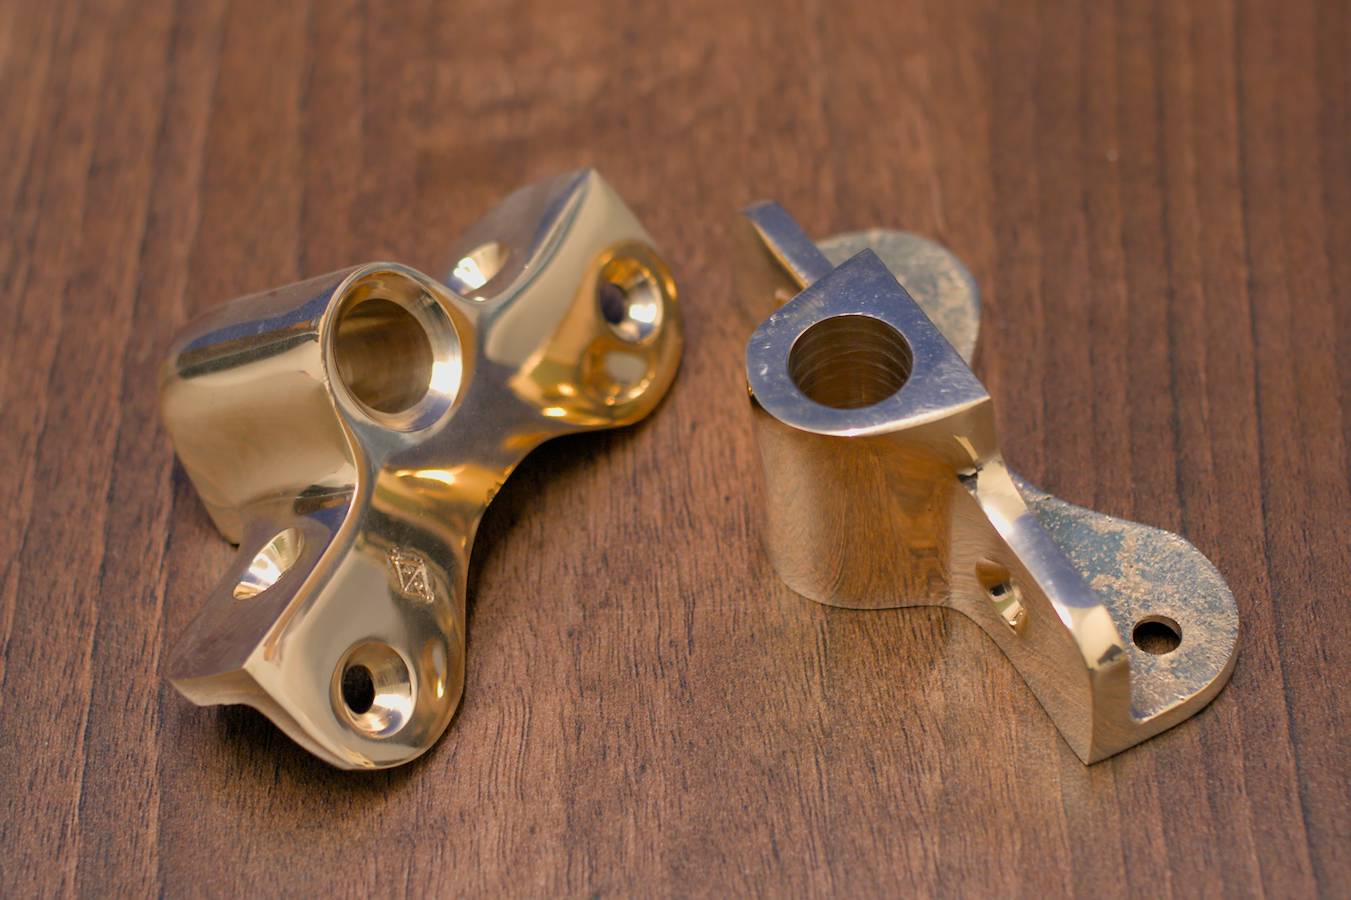 Silicon bronze side sockets for rowlocks